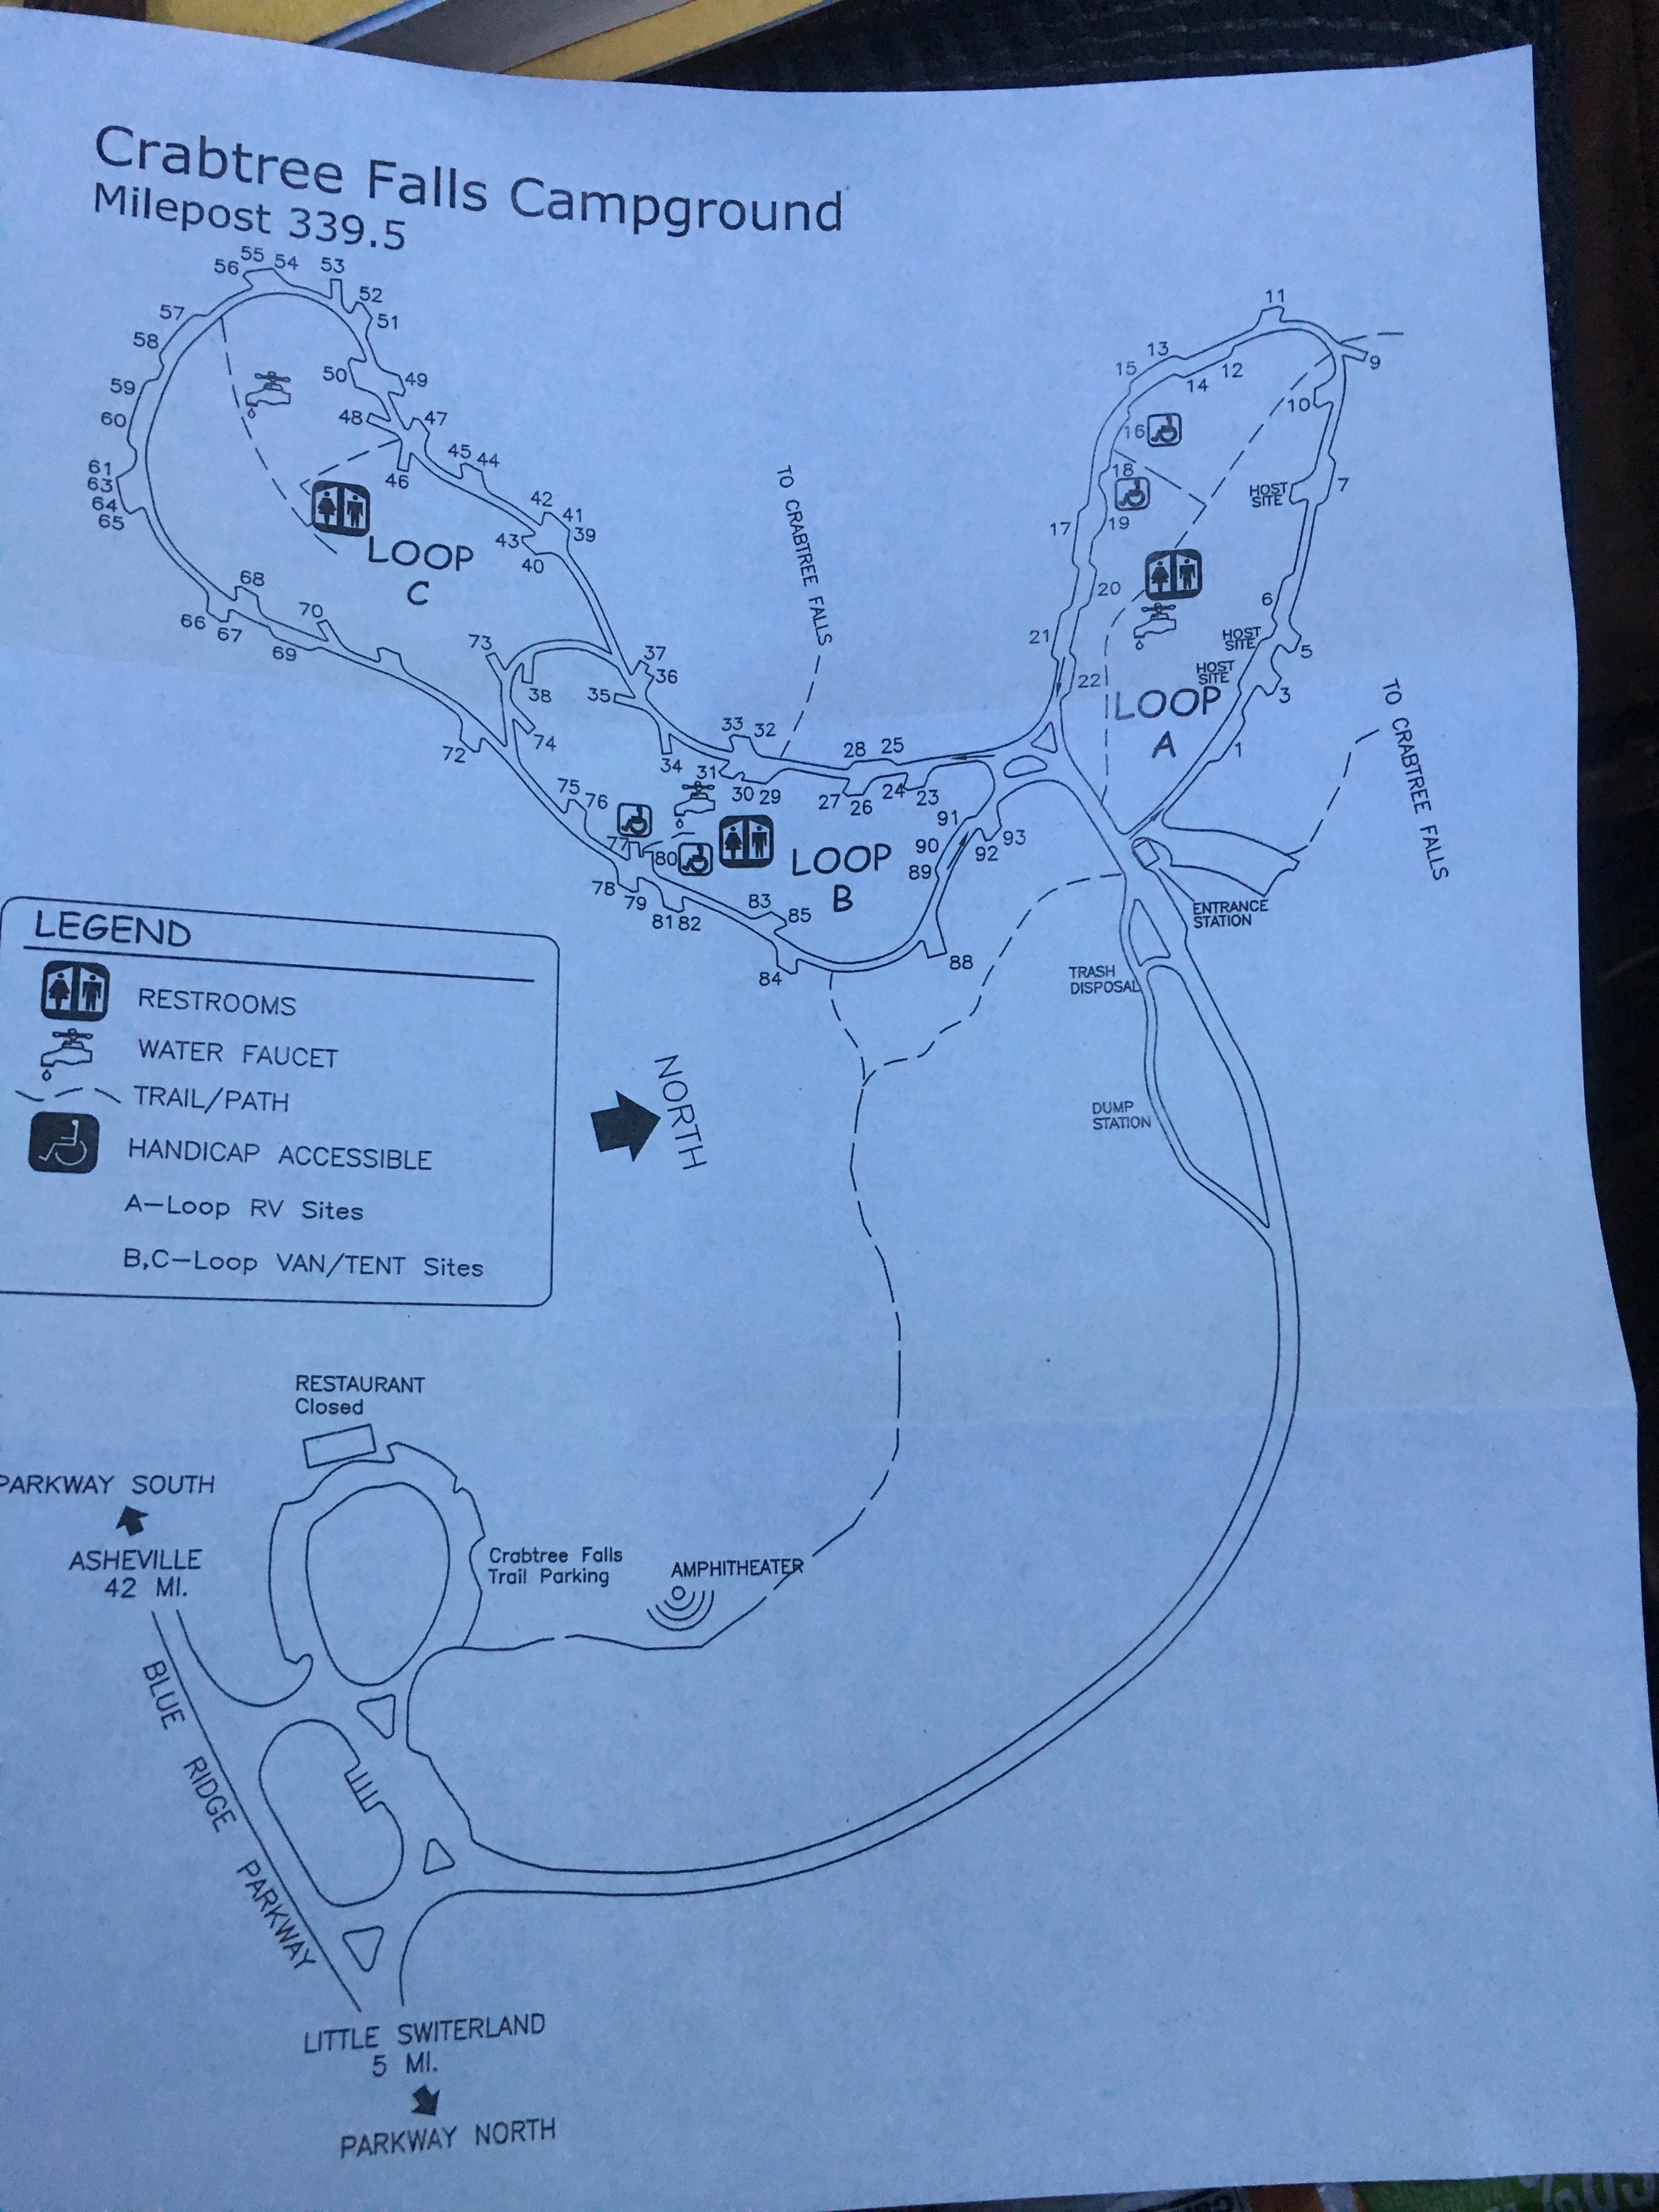 Map of the campground area